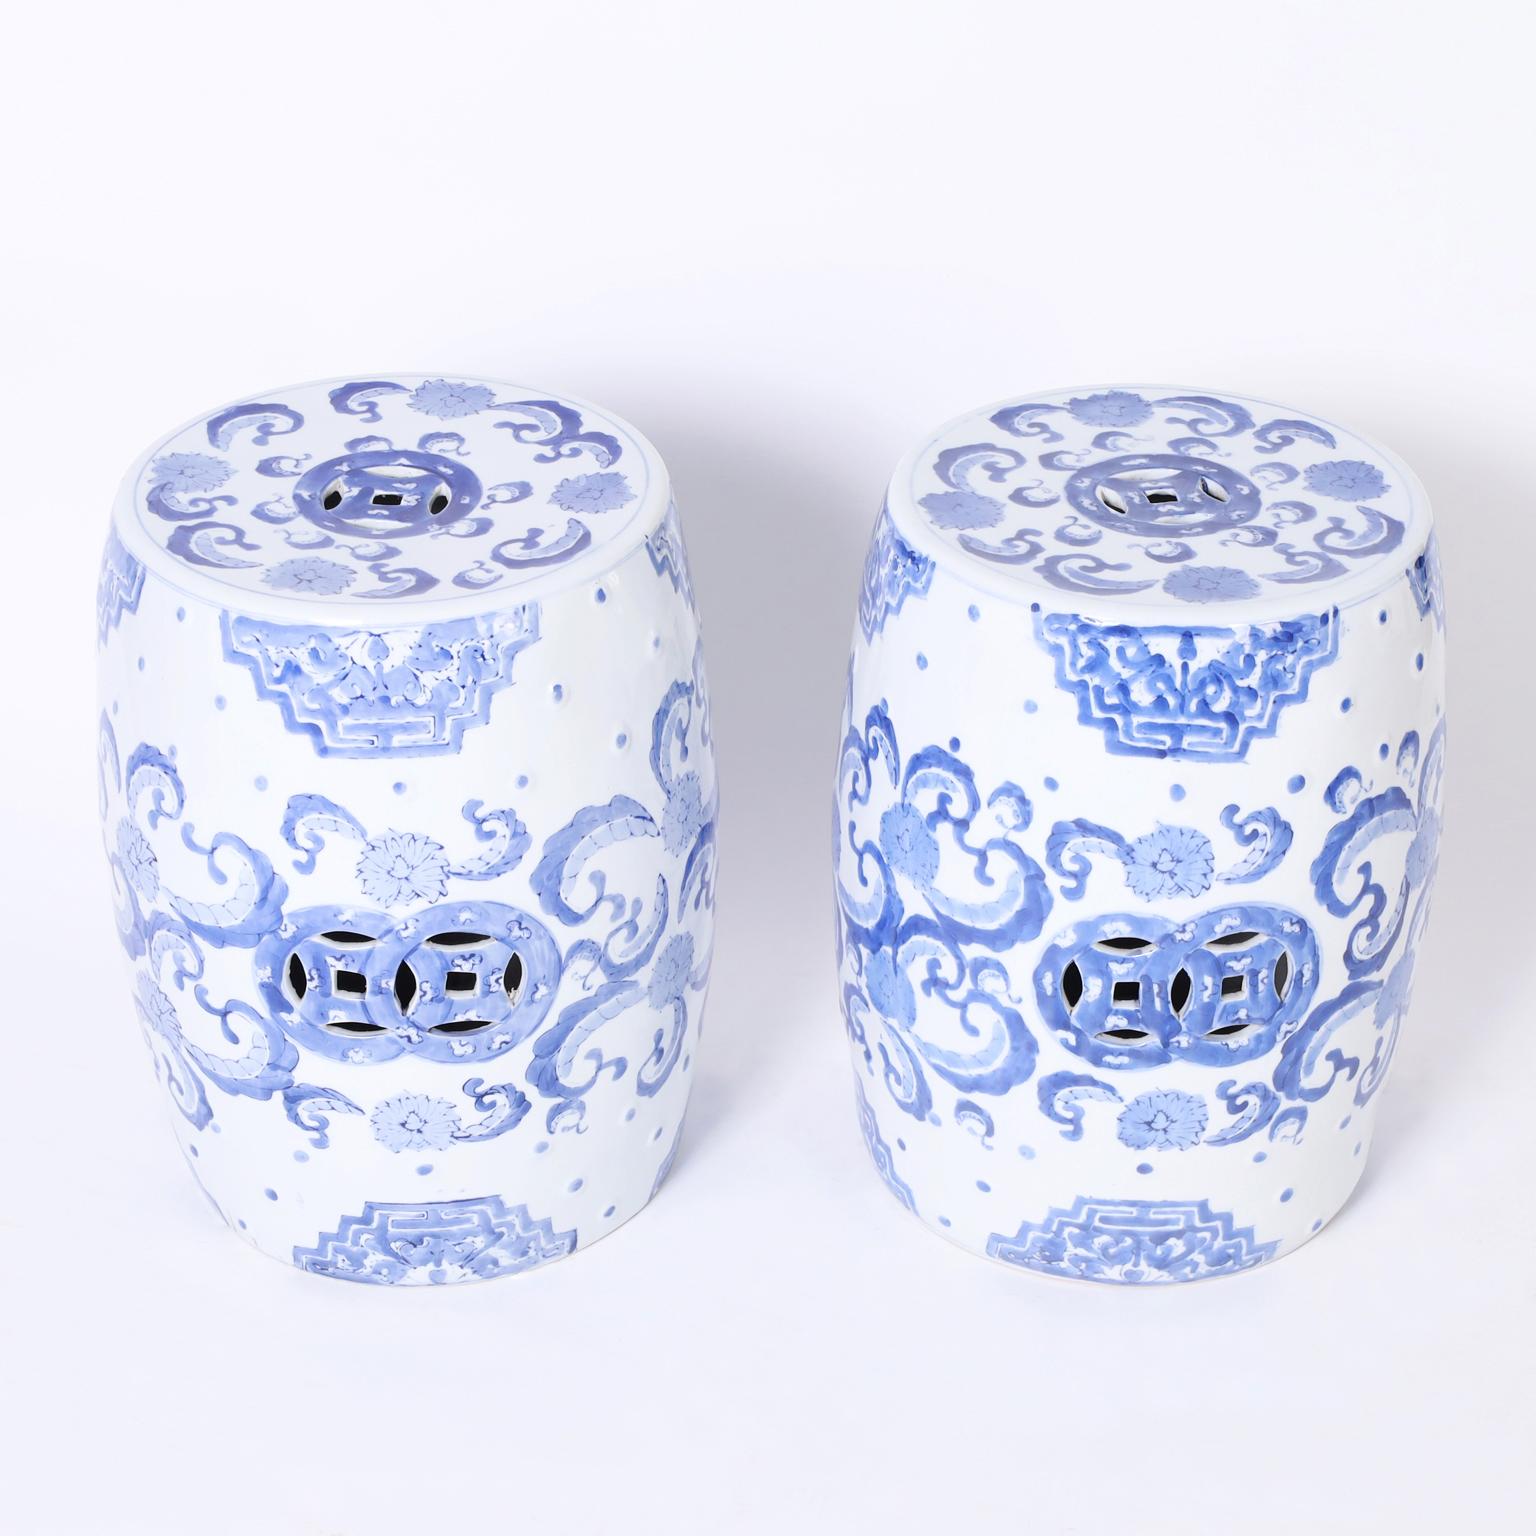 Pair of mid century Chinese garden seats crafted in terra cotta in classic form and hand decorated with charming blue floral designs on a white glazed background.